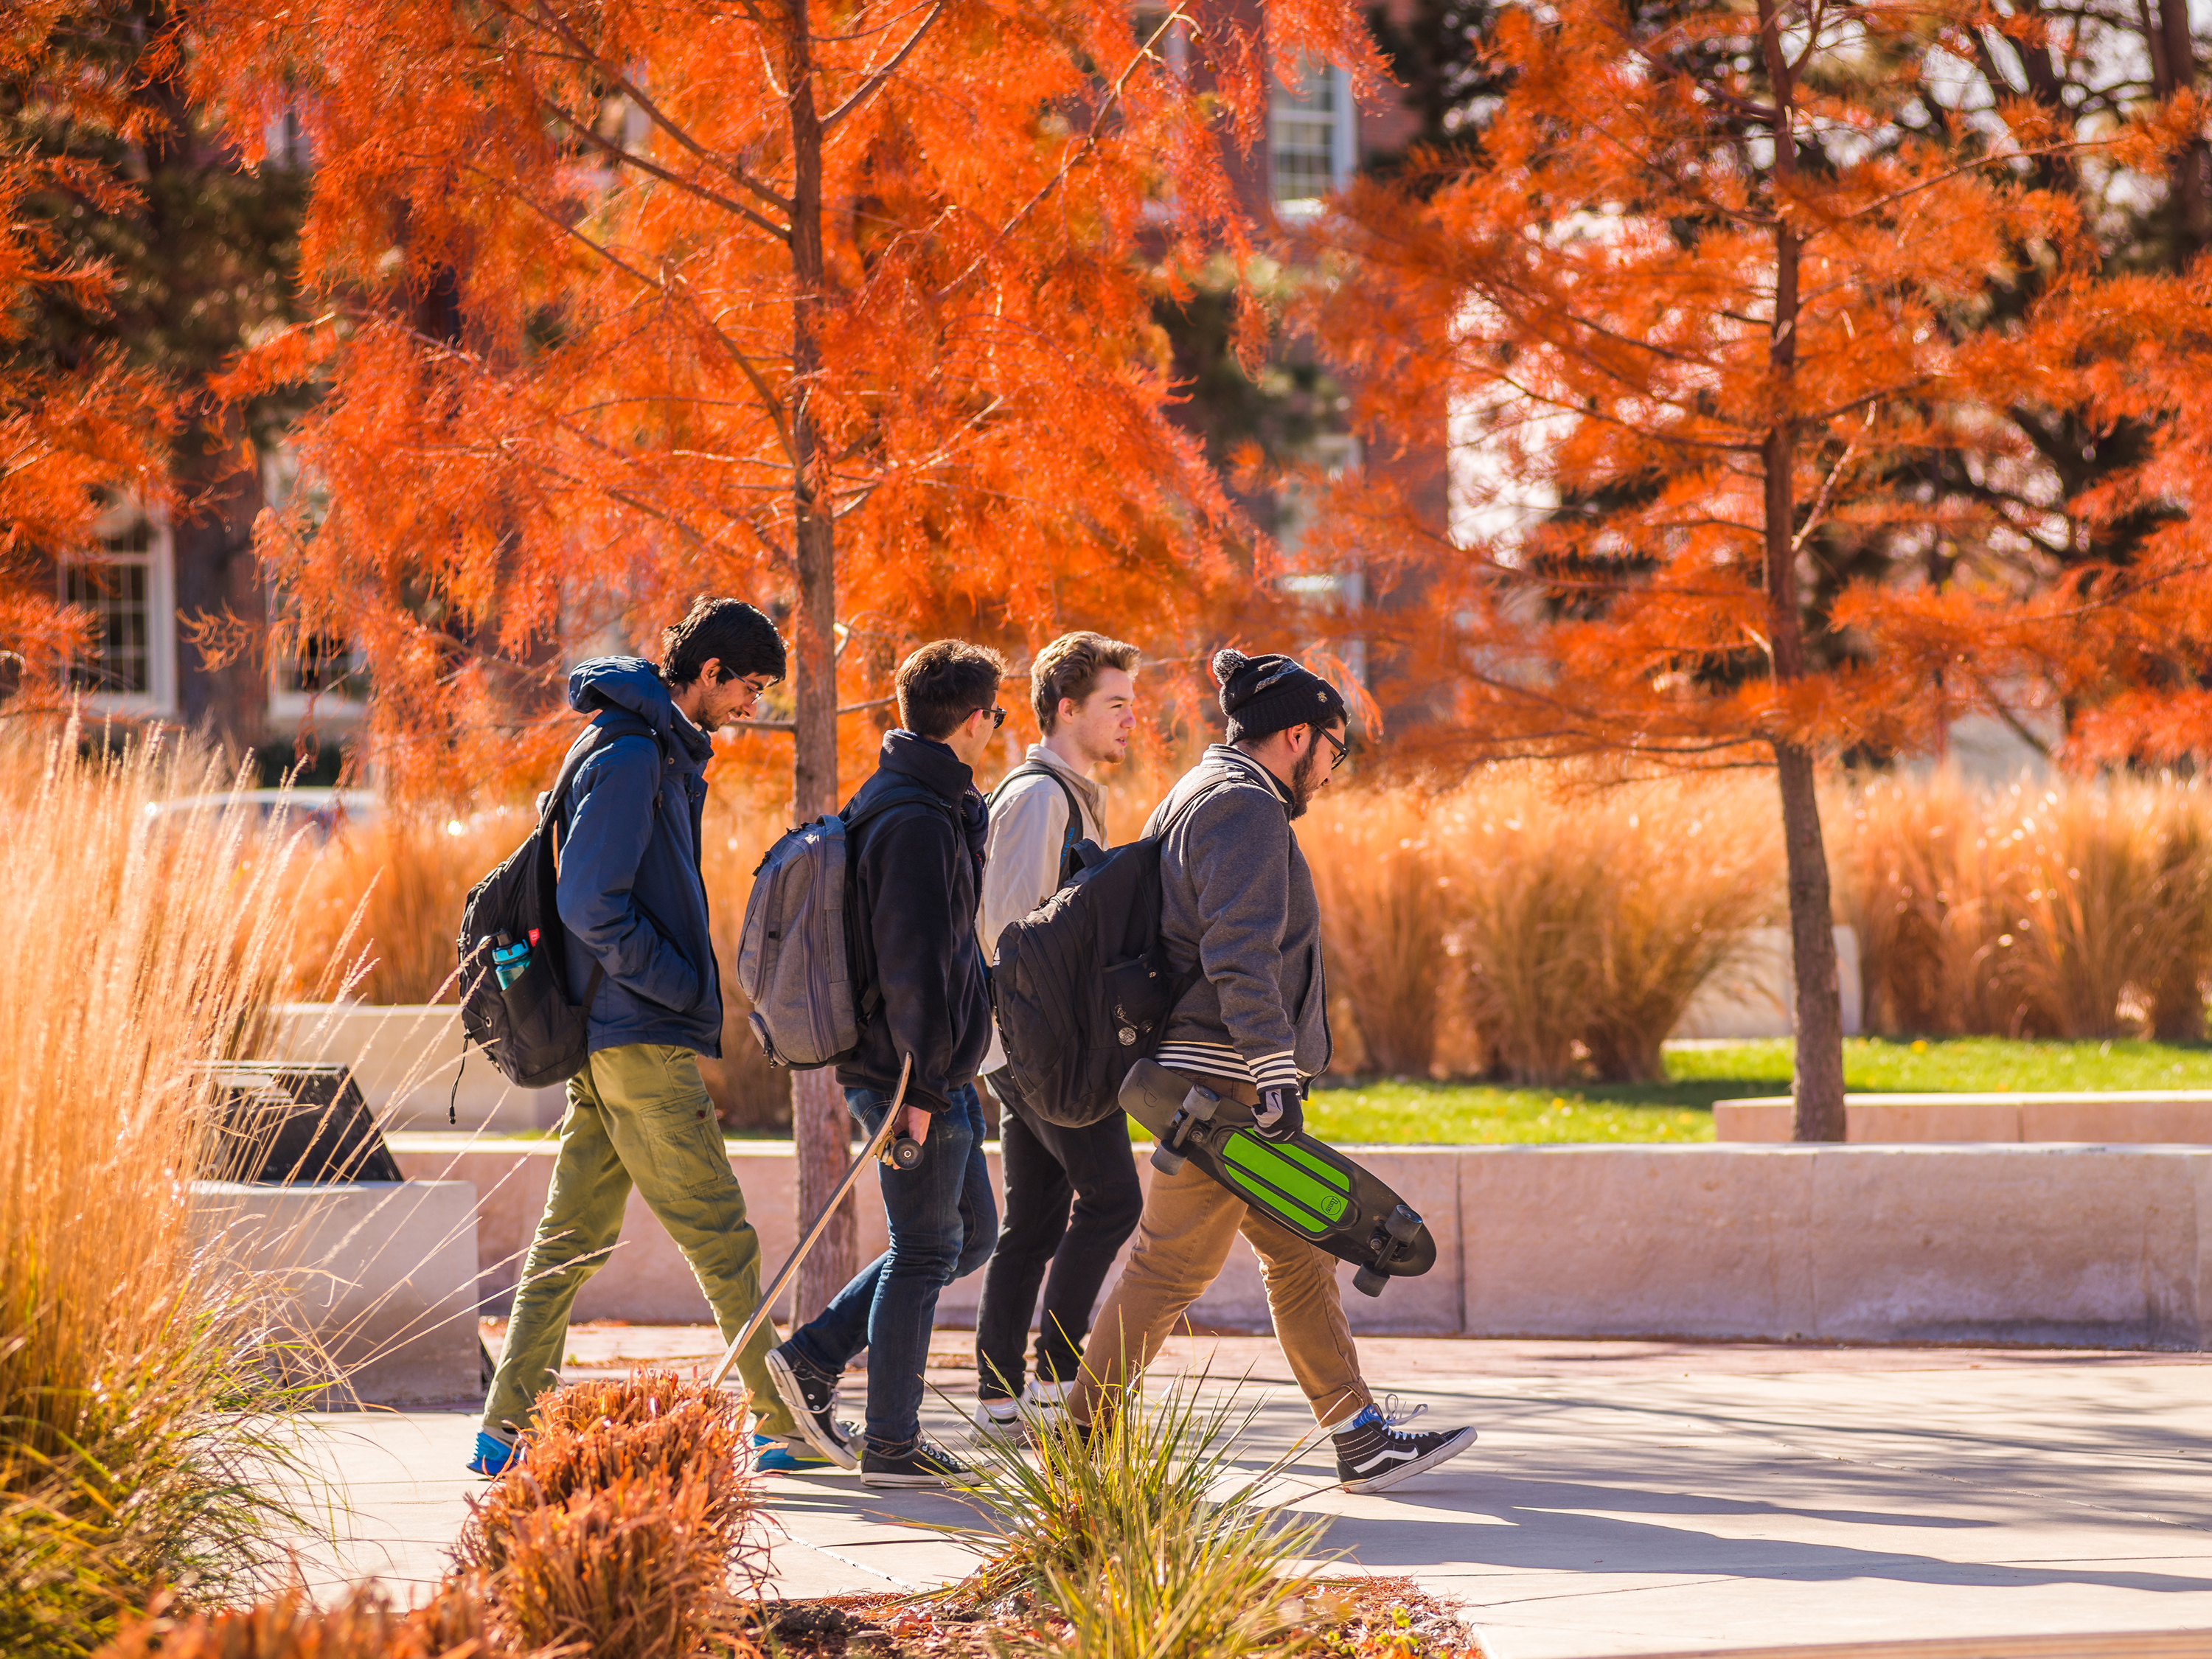 Students on campus in fall